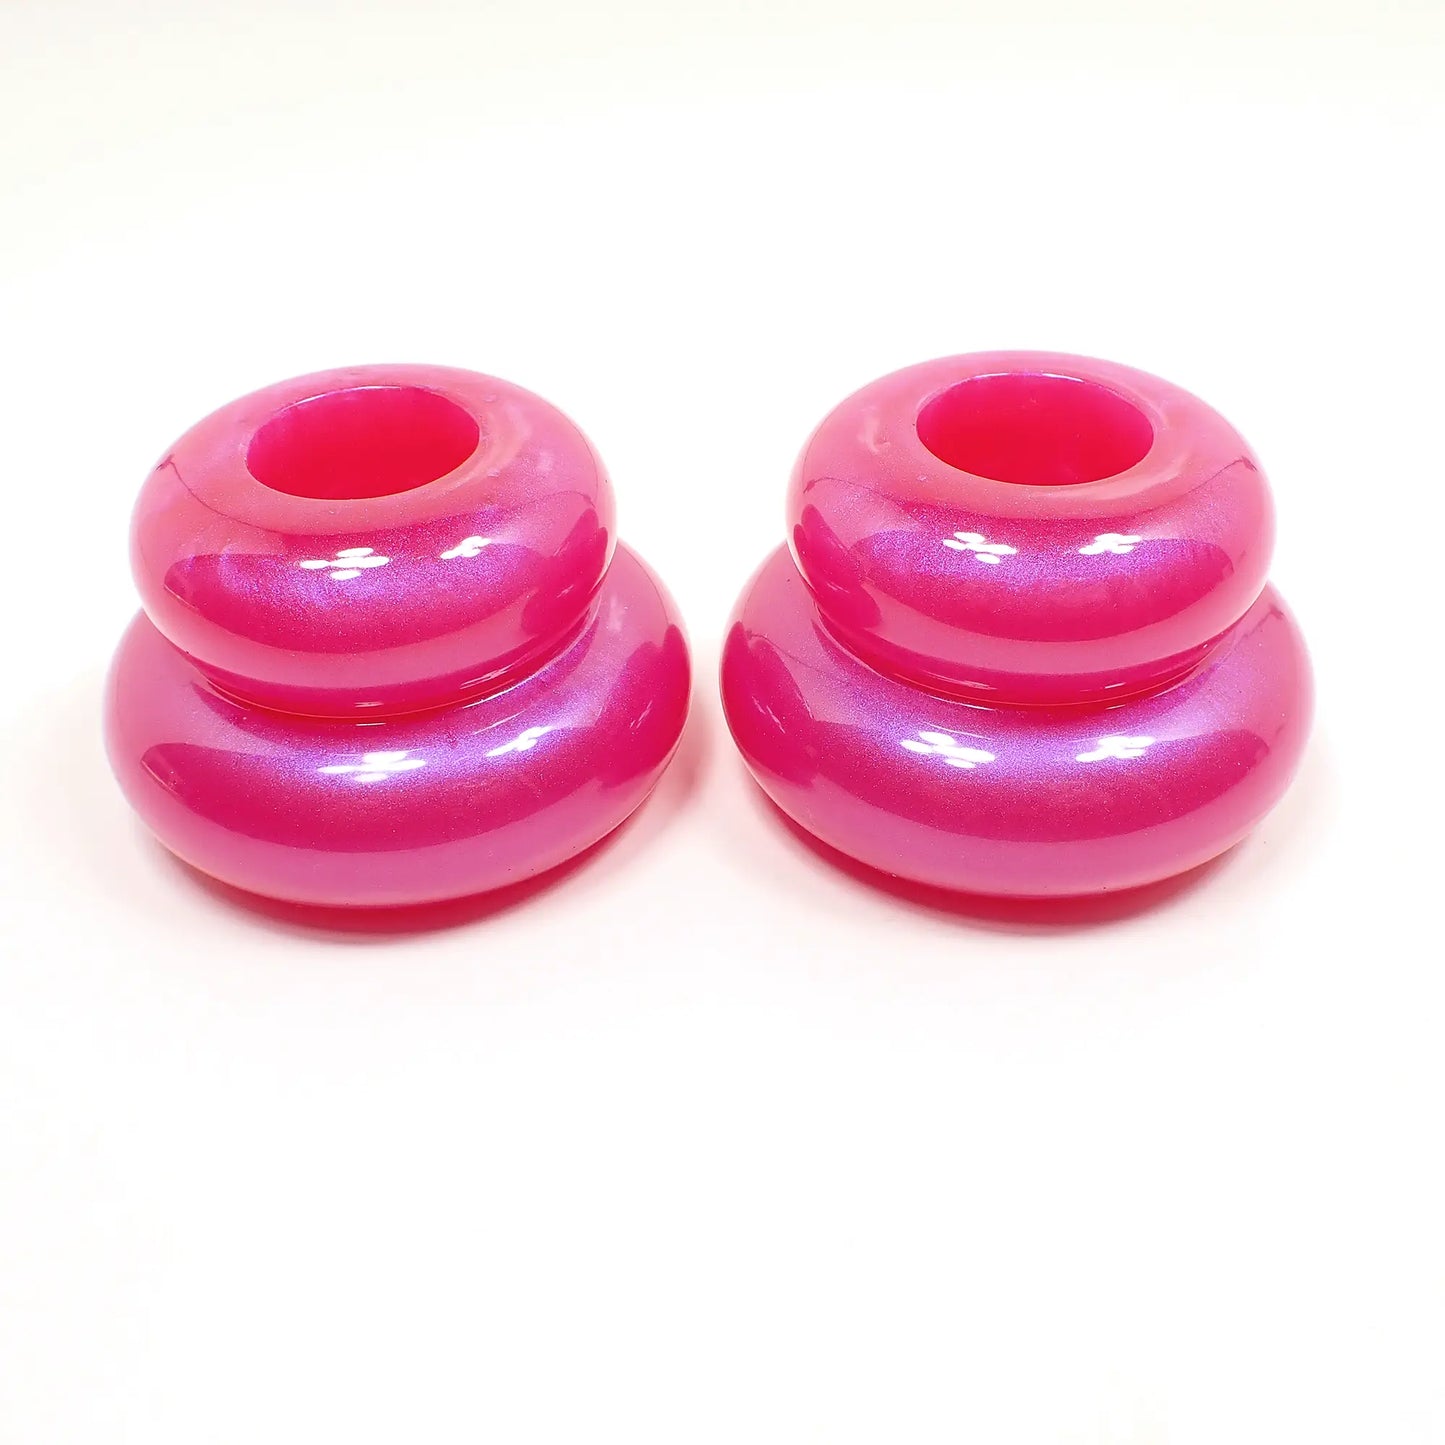 Set of Two Bright Pearly Pink Resin Handmade Puffy Round Double Ring Candlestick Holders